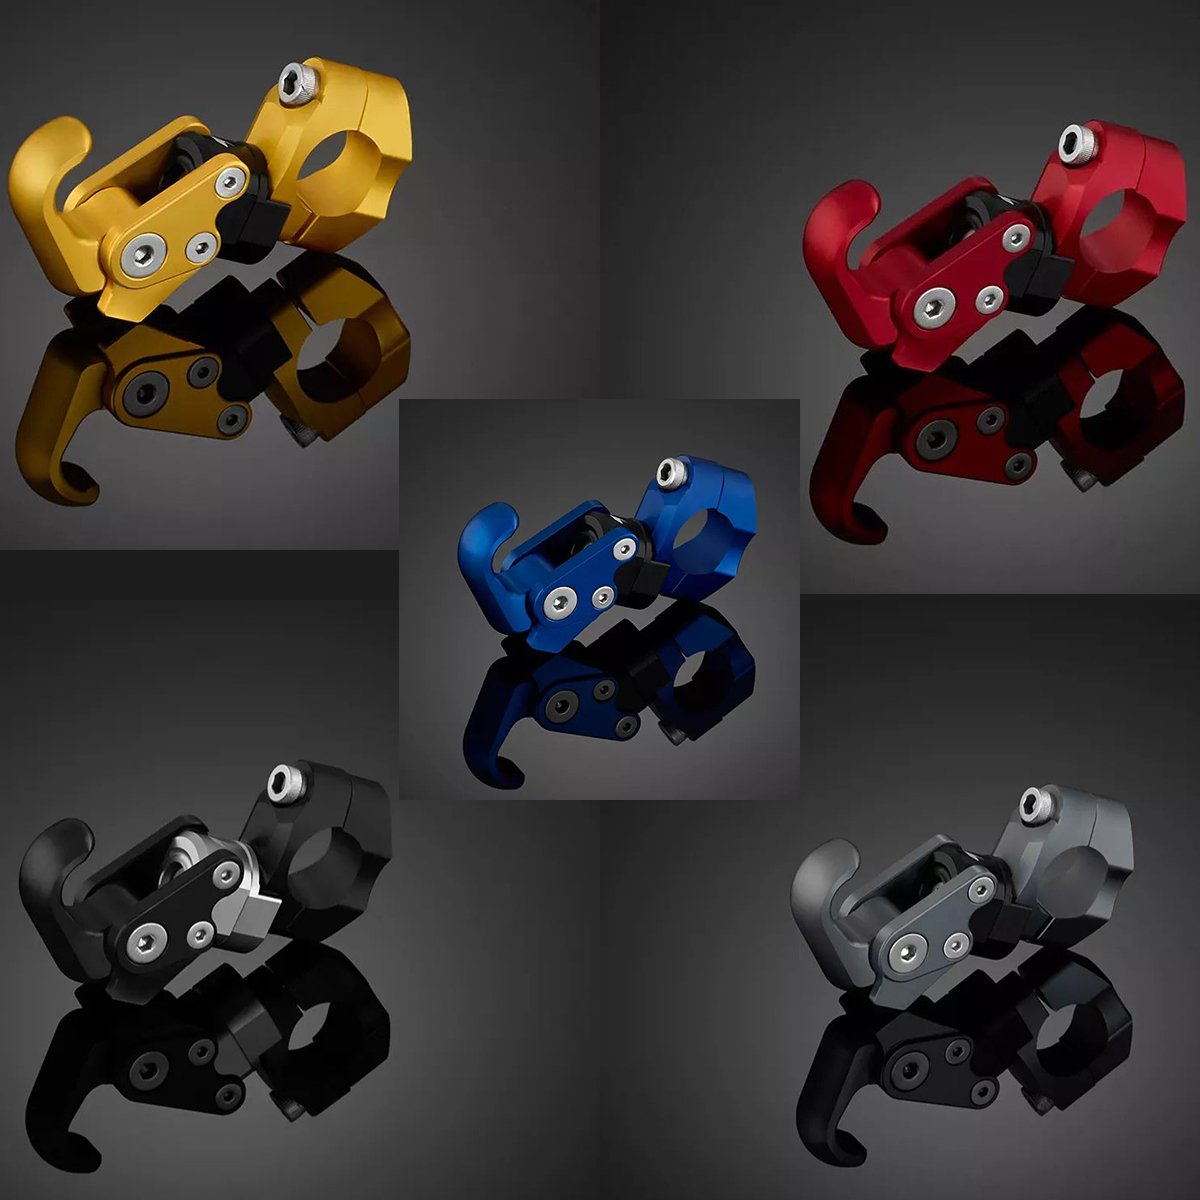 Handlebar hanger has 5 colors: black, gray, red, yellow and blue